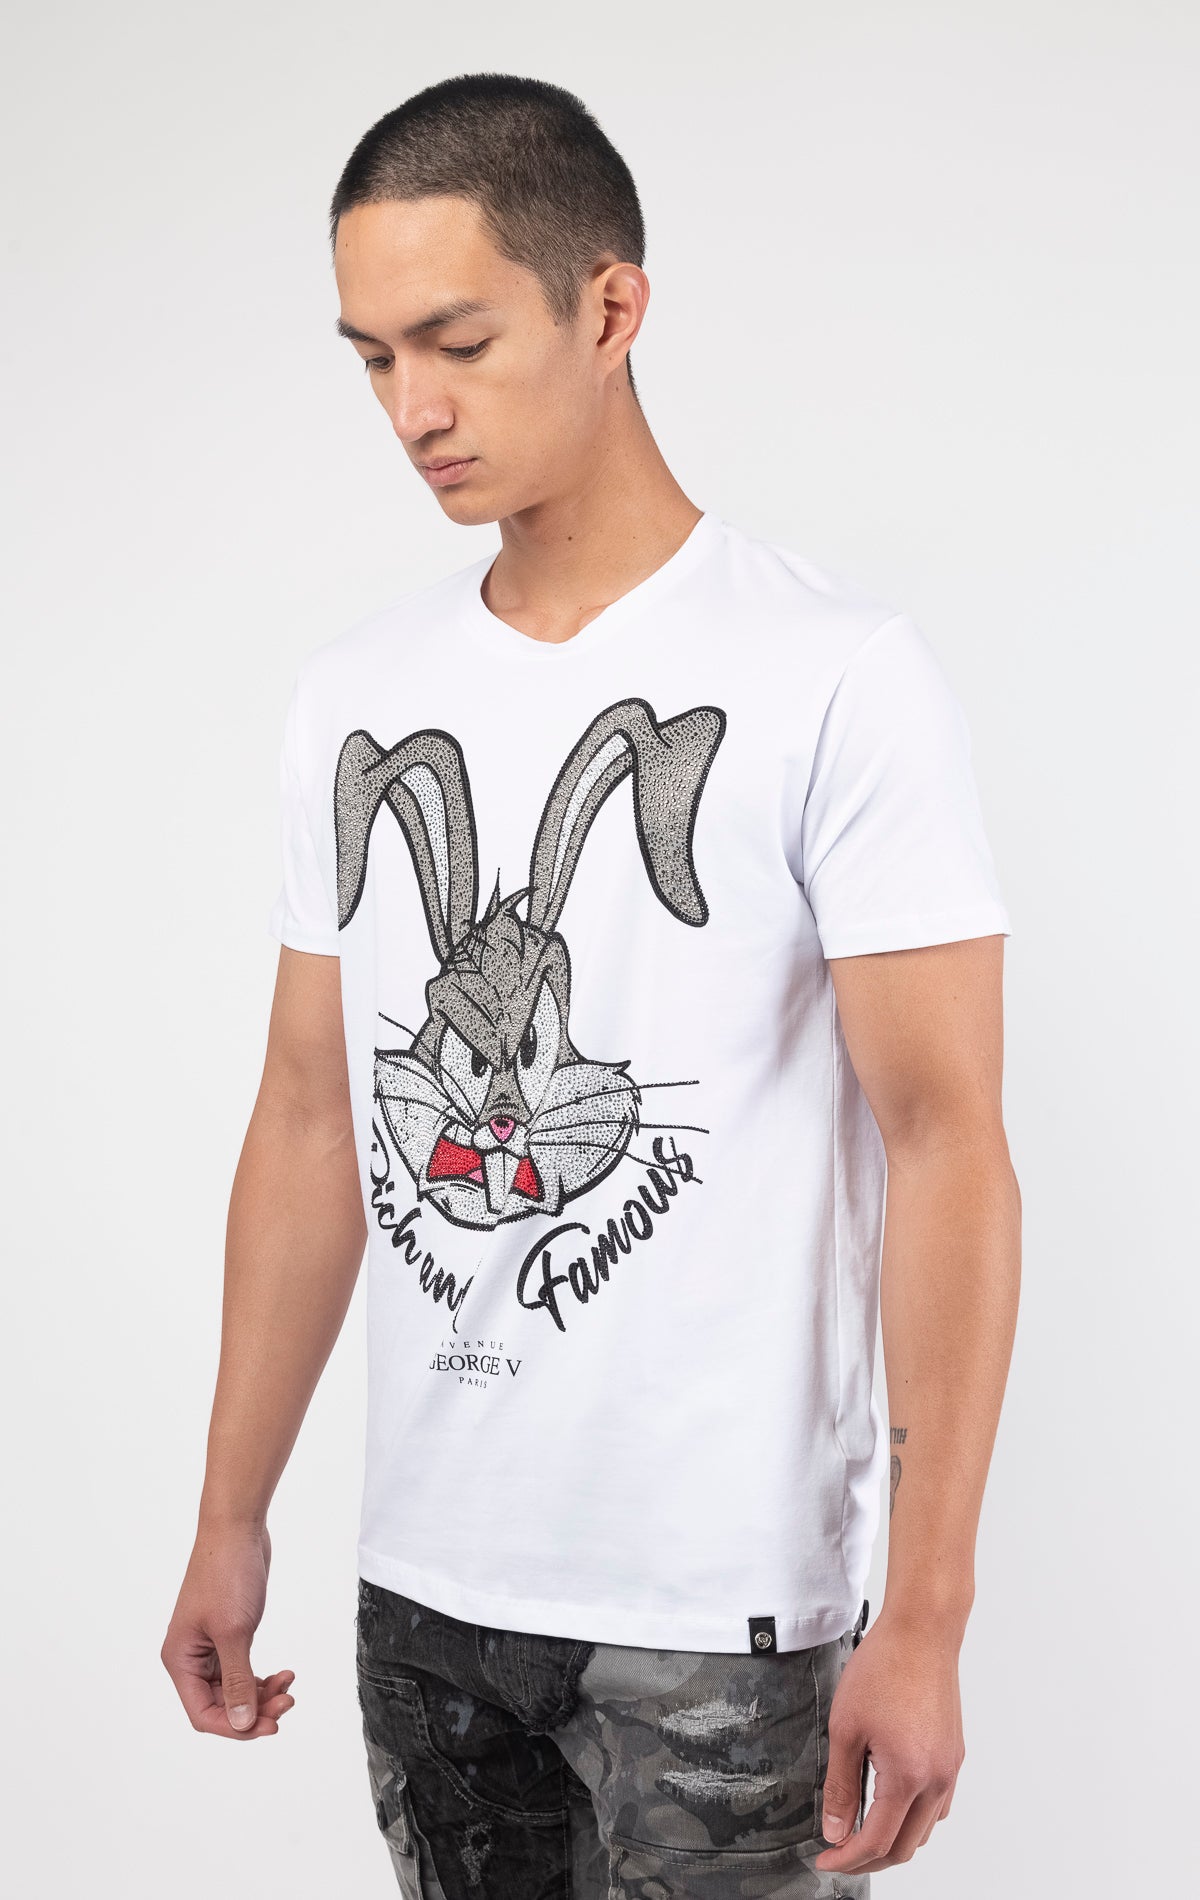 WHITE T-shirt featuring an angry rabbit pattern adorned with rhinestones.